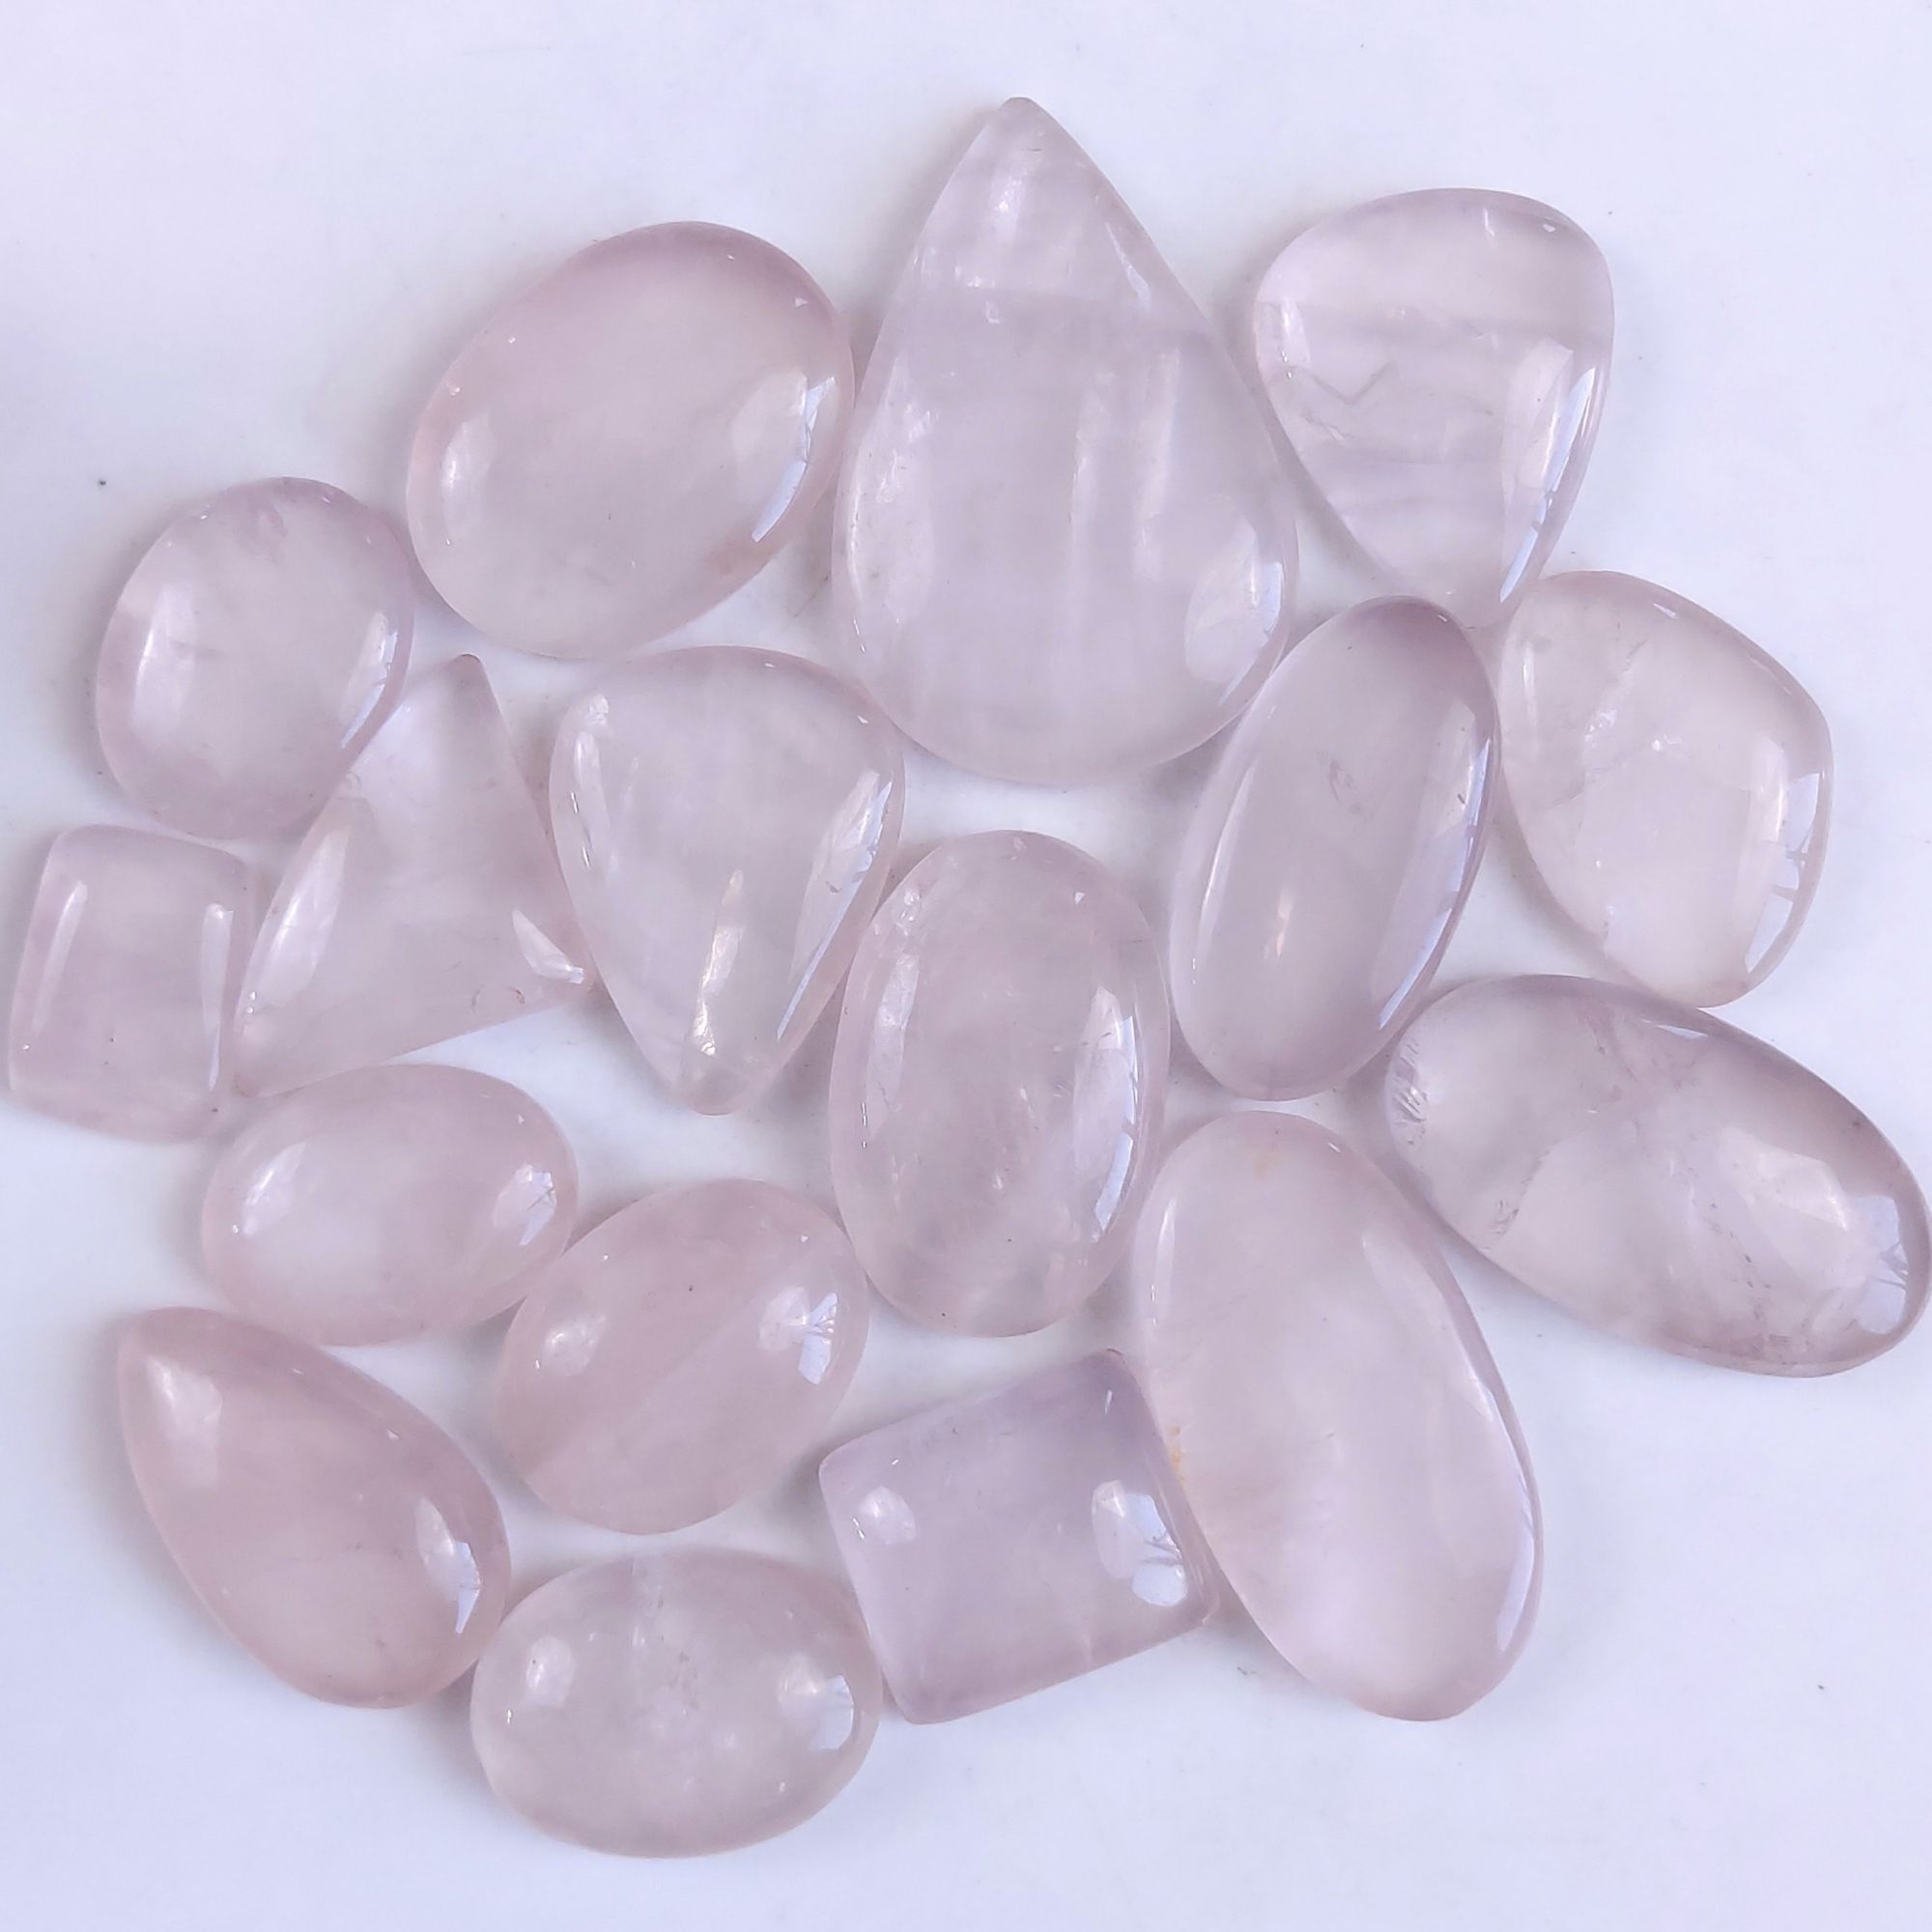 17Pcs 952Cts Natural Rose Quartz Loose Cabochon Gemstone Lot Mix Shape and and Size for Jewelry Making 50x30 15x12mm#1269